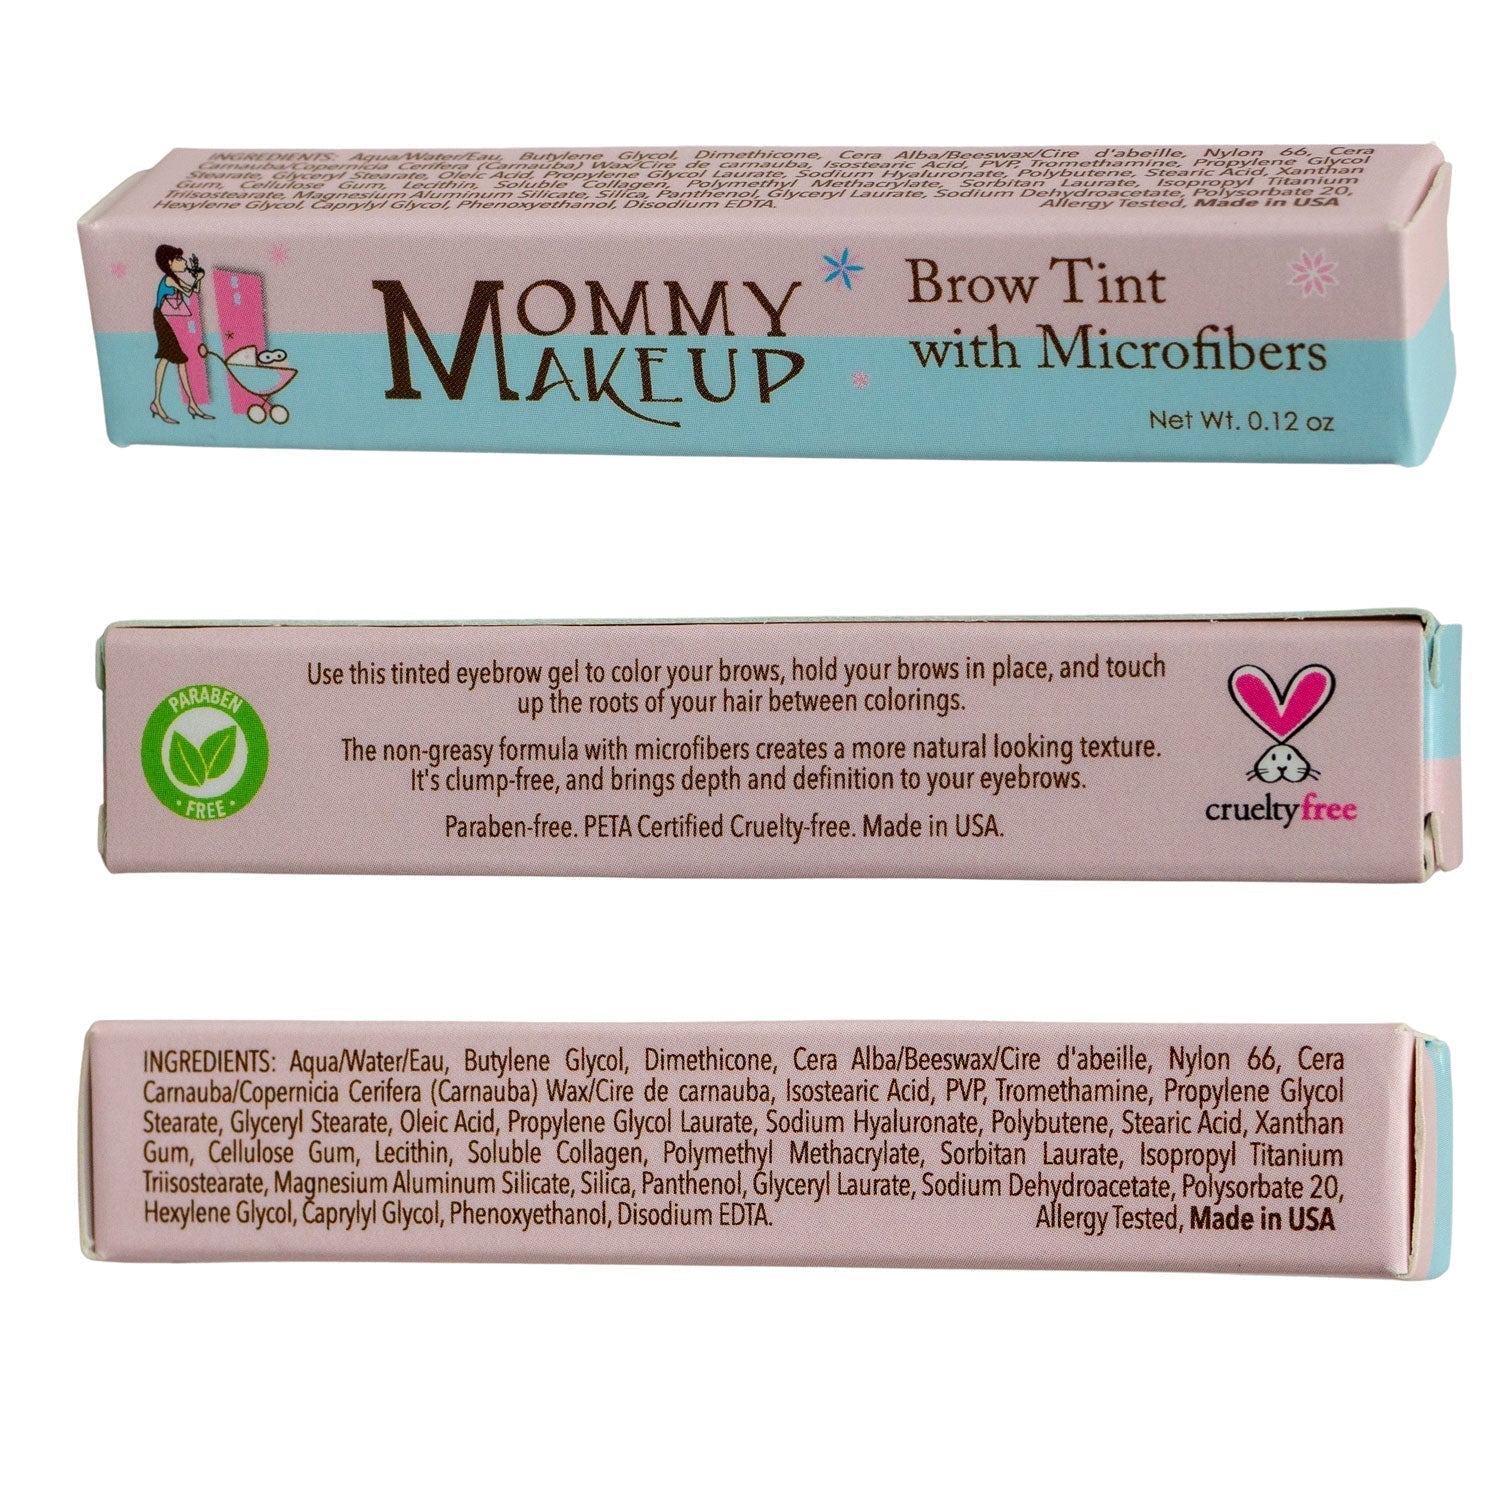 Clump-free, paraben-free, talc free, allergy tested, PETA certified cruelty free Brow Tint with Microfibers #Brow_Tint 